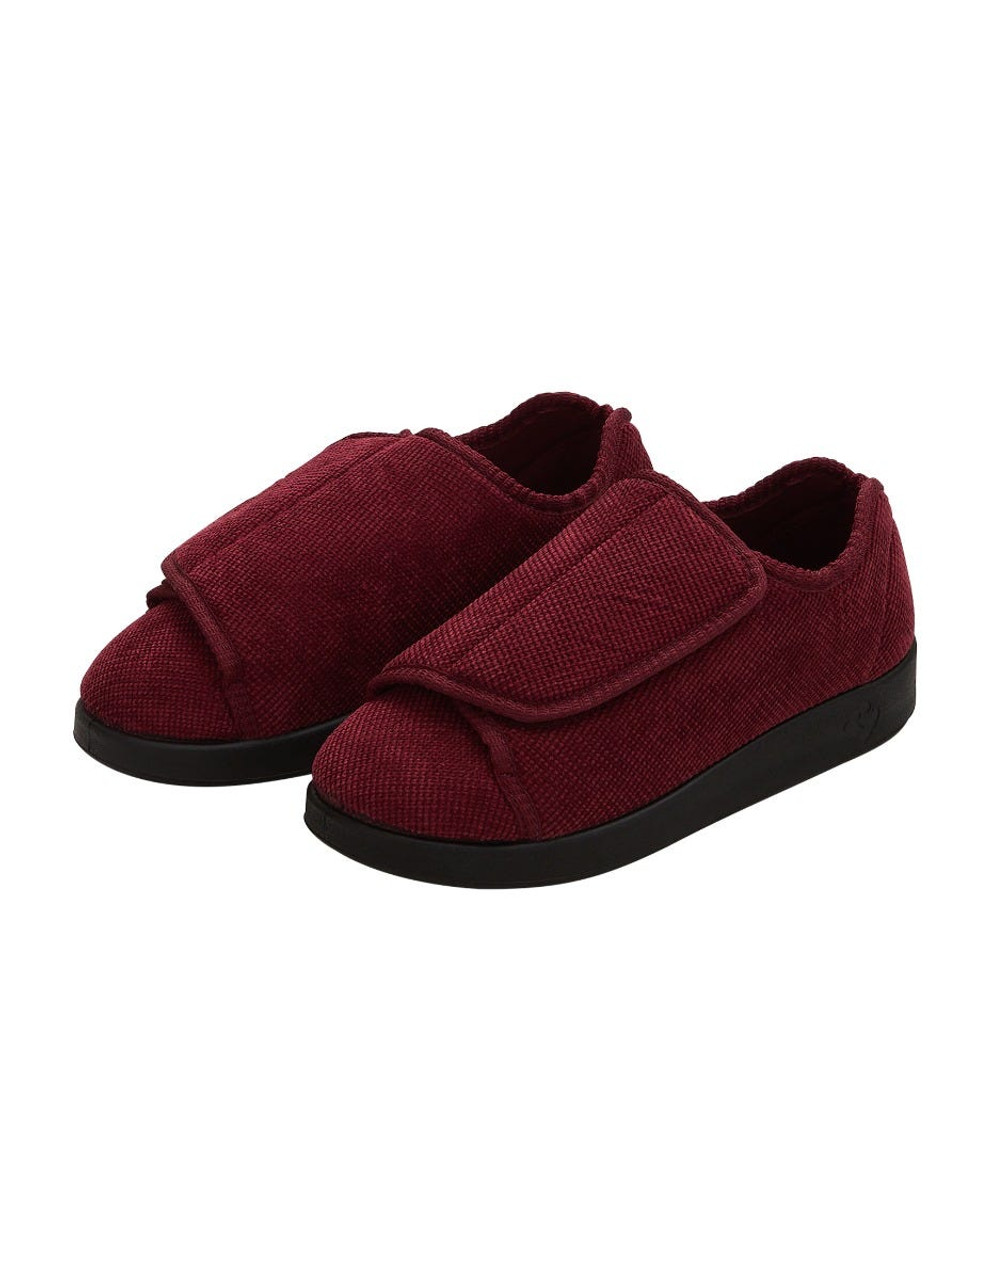 Silverts SV15100 Womens Extra Extra Wide Easy Closure Slippers Wine, Size=11, SV15100-SVWIB-11